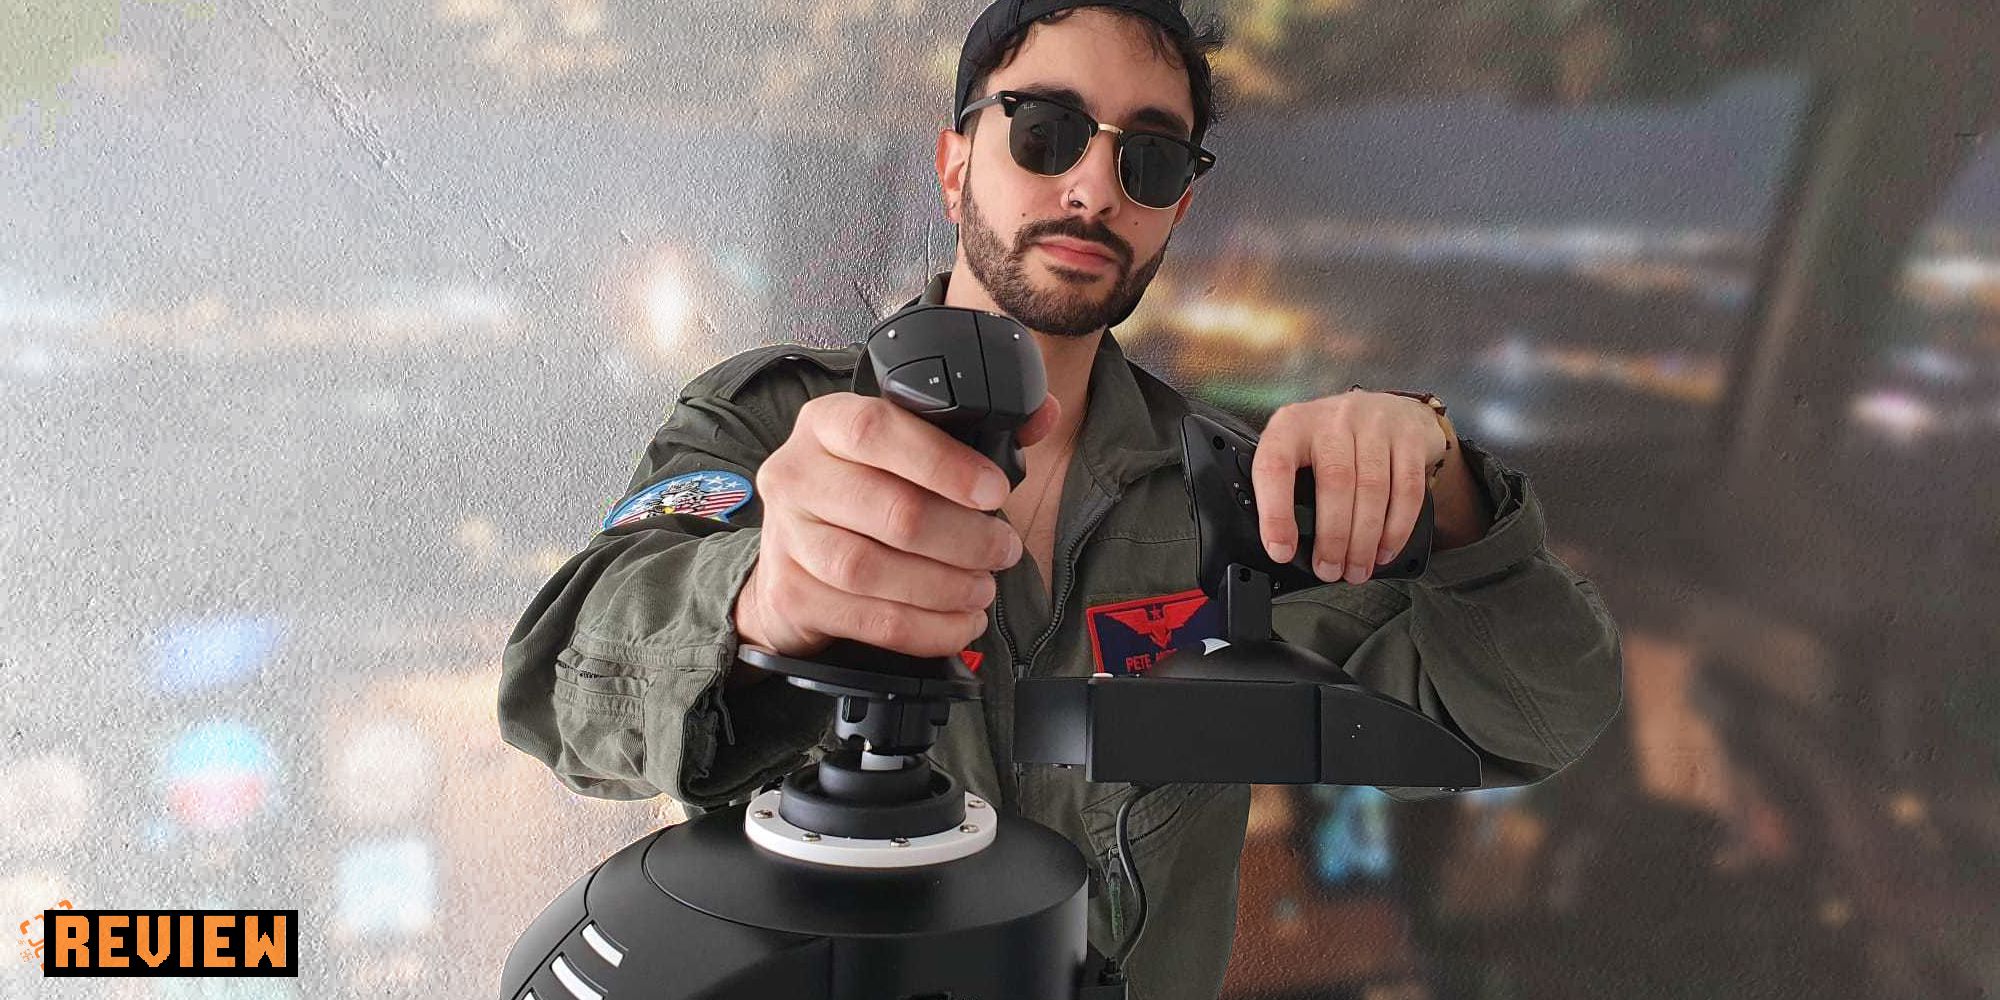 Thrustmaster Review - issy van der velde in a flight suit and sunglasses holding the thurstmaster 